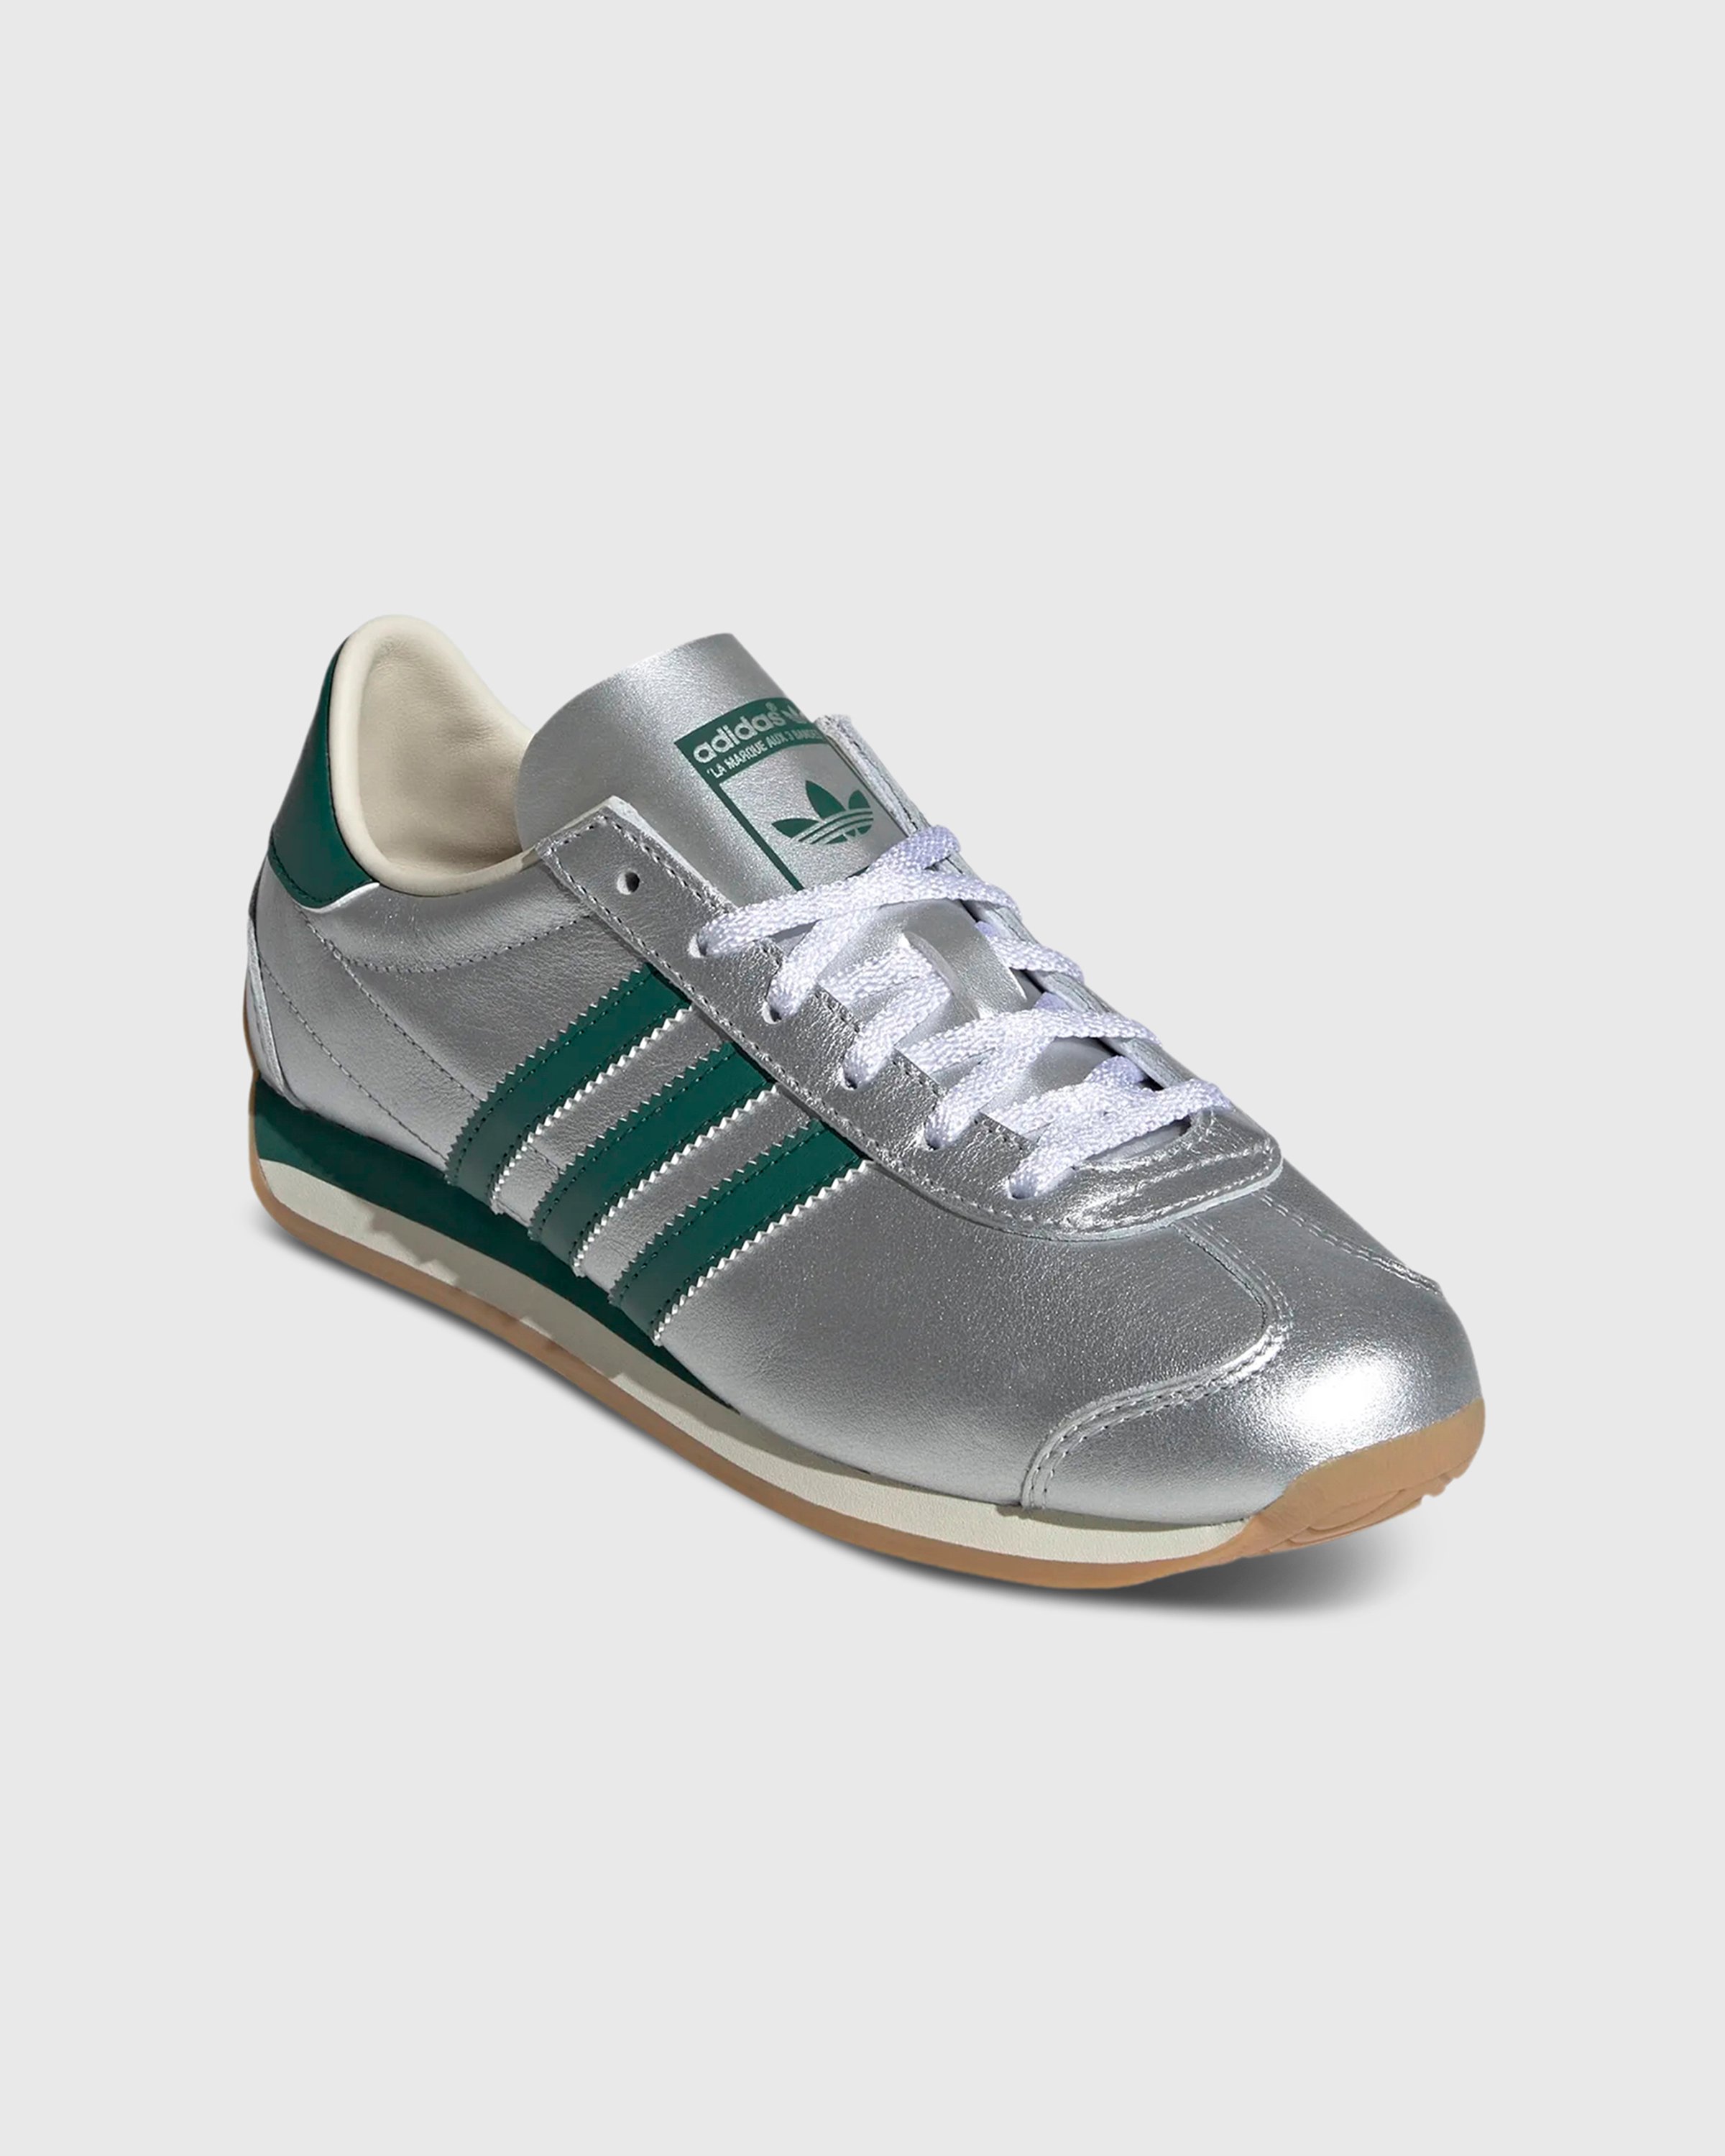 Adidas - COUNTRY OG W        SILVMT/CGREEN/CWHITE - Footwear - Silver - Image 3